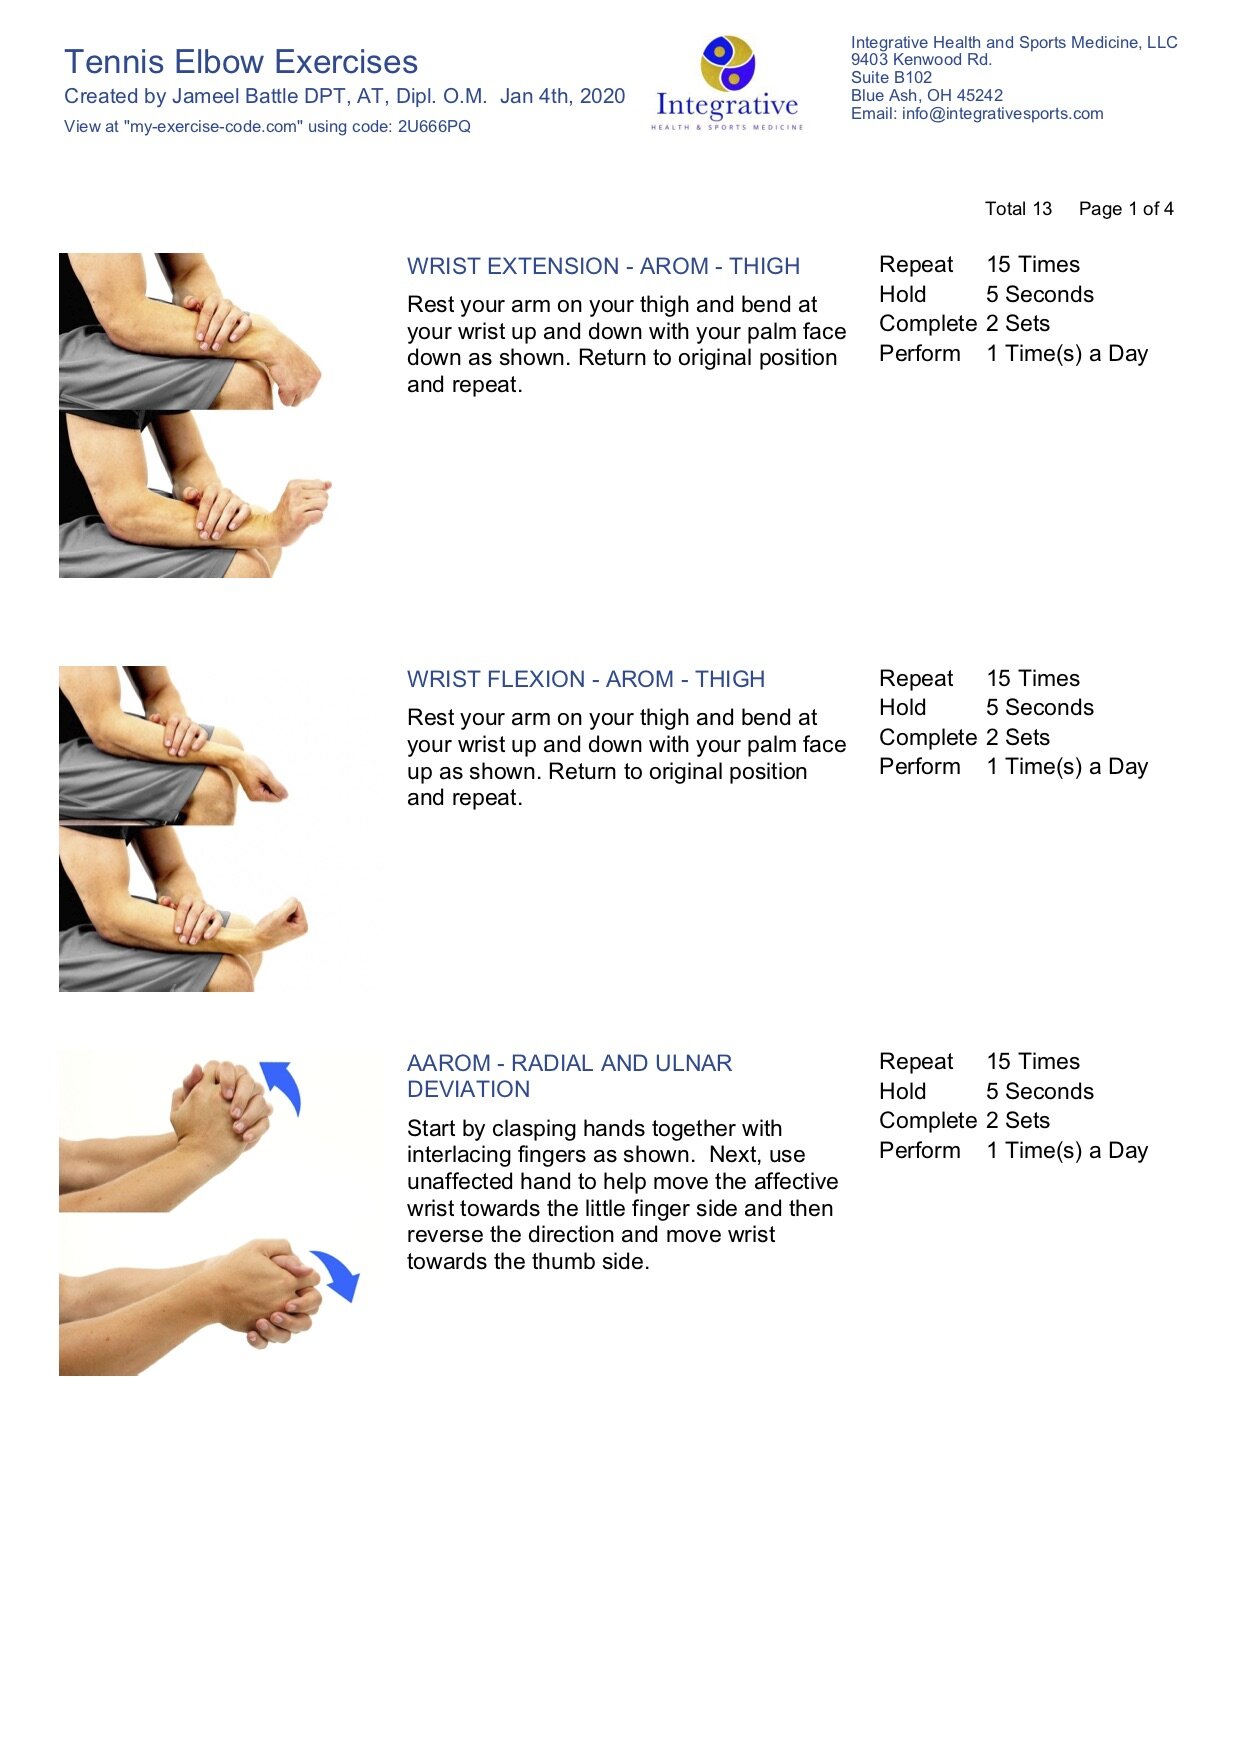 Home Exercise Program for Tennis Elbow (Lateral Epicondylagia) — Integrative Health + Sports Medicine picture